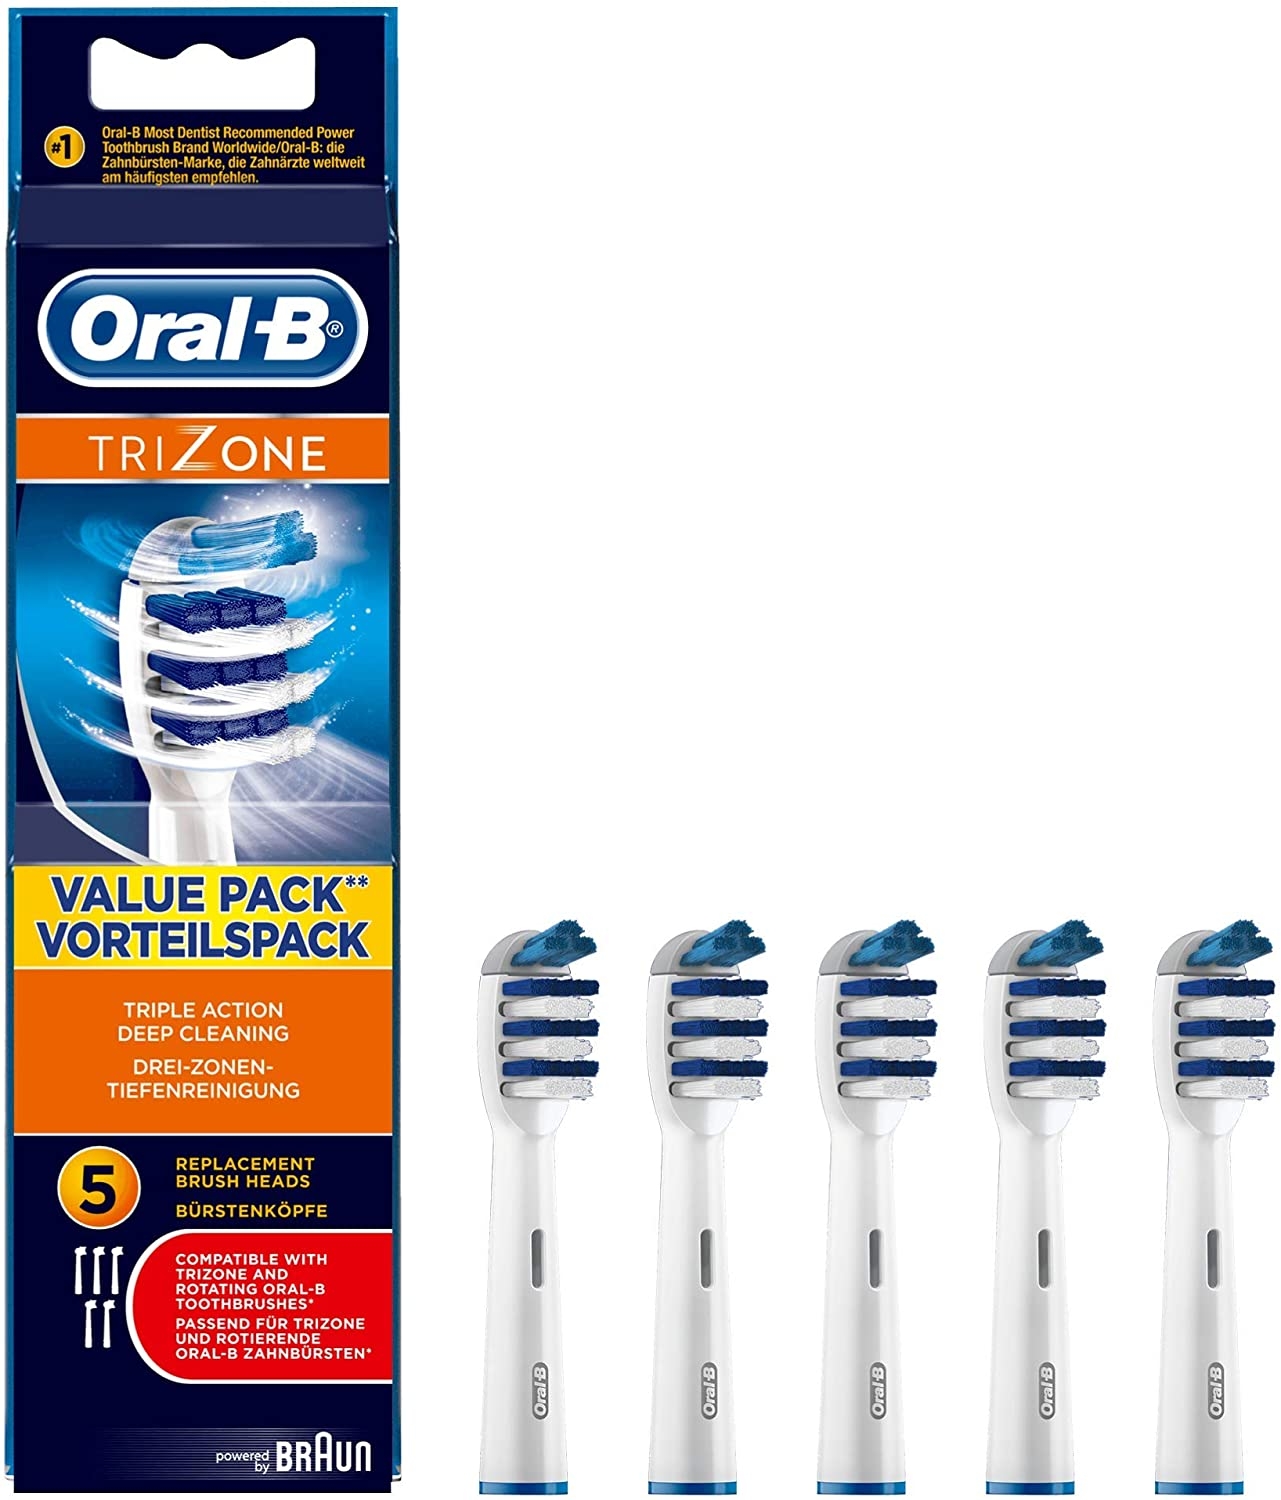 Oral-B TriZone Electric Toothbrush Heads - 5 Pack